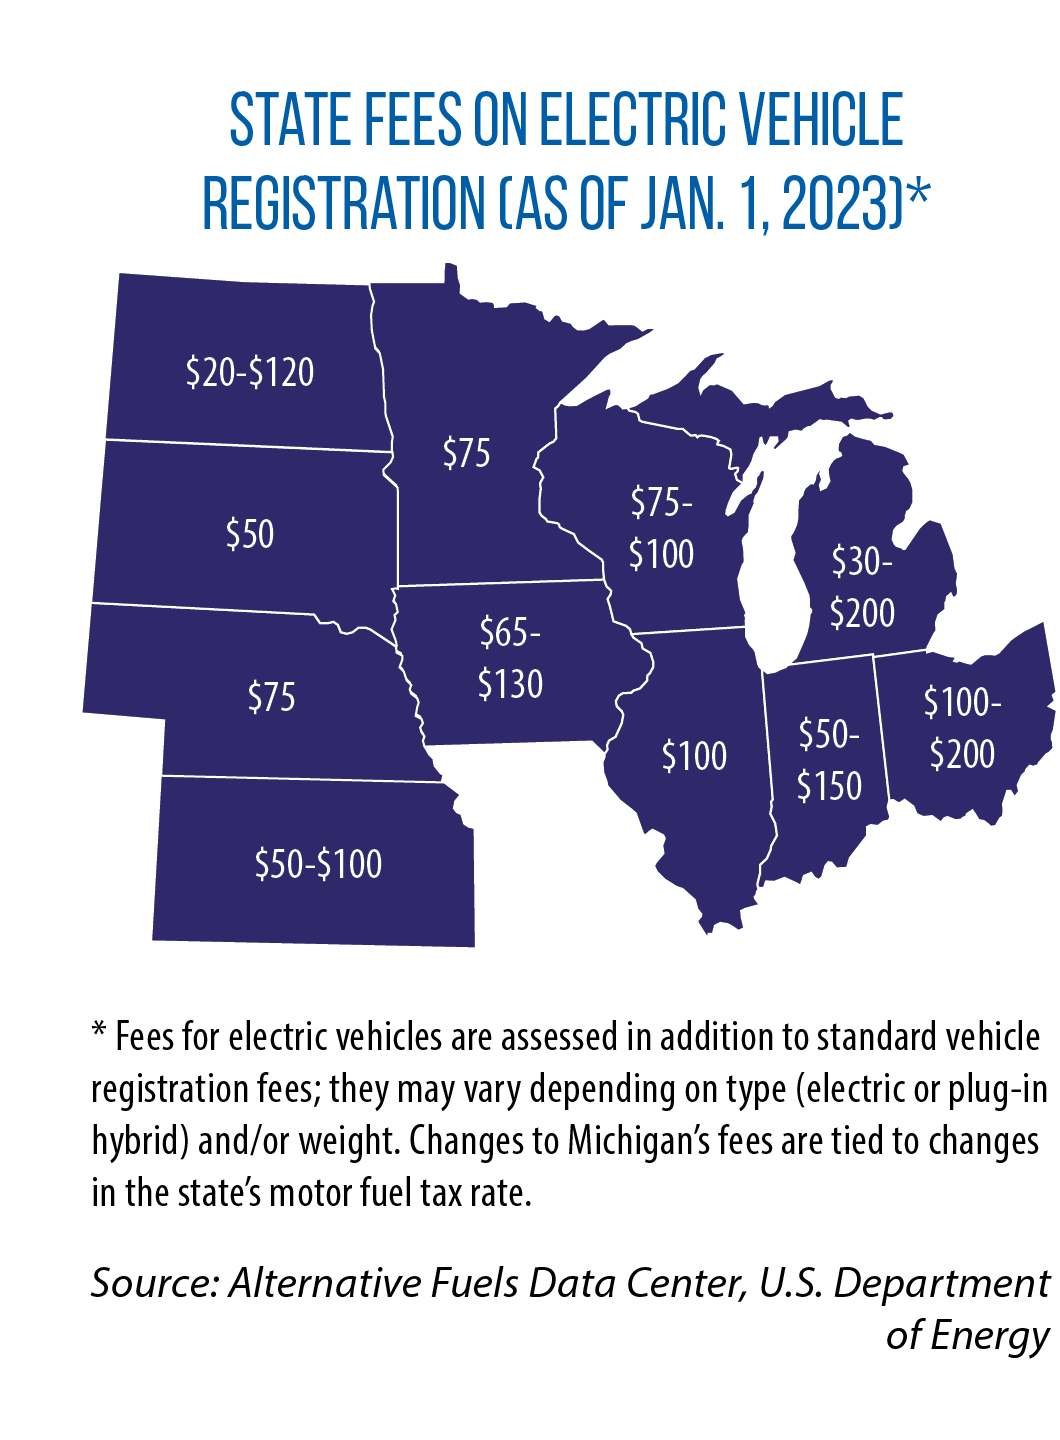 Map of Electric Vehicle registration fees in Midwestern states as of January 2023.